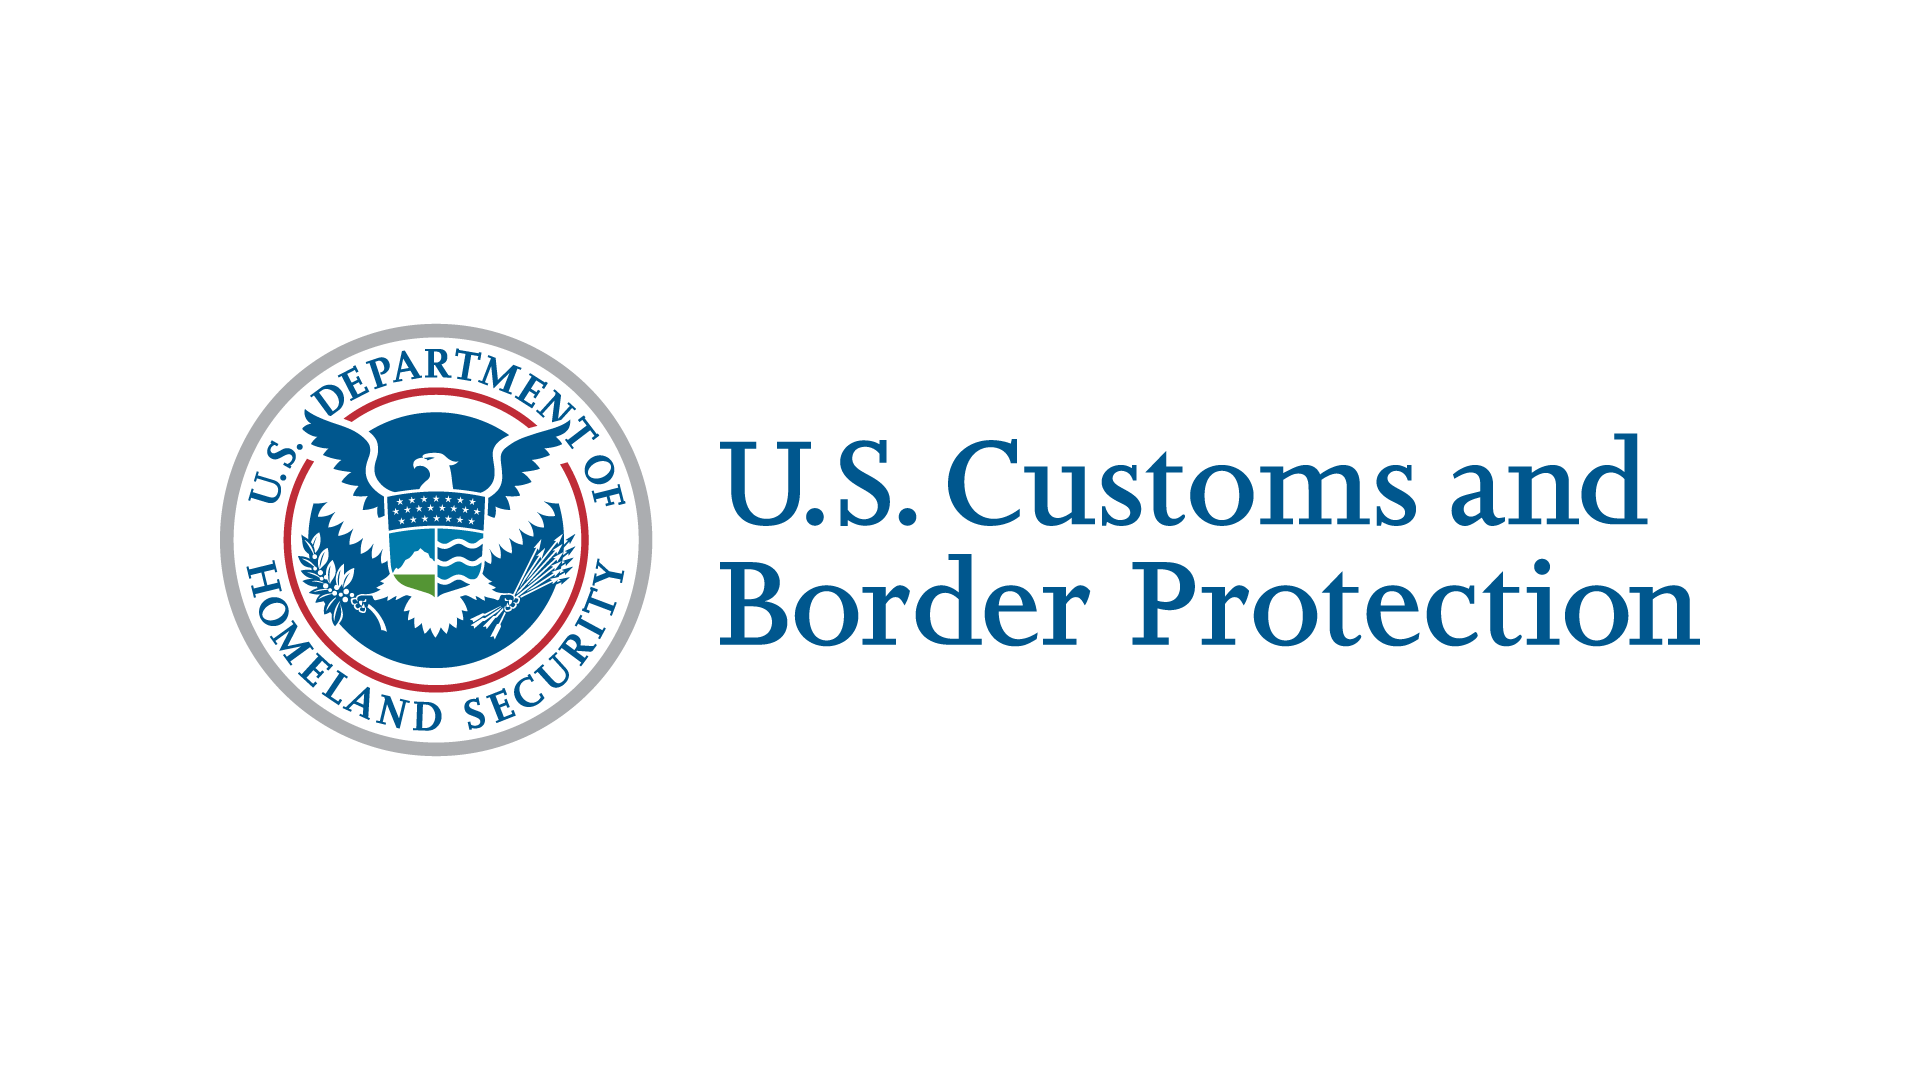 Customs and Border Patrol Logo - US Customs and Border Protection Ring the NYSE Opening Bell®